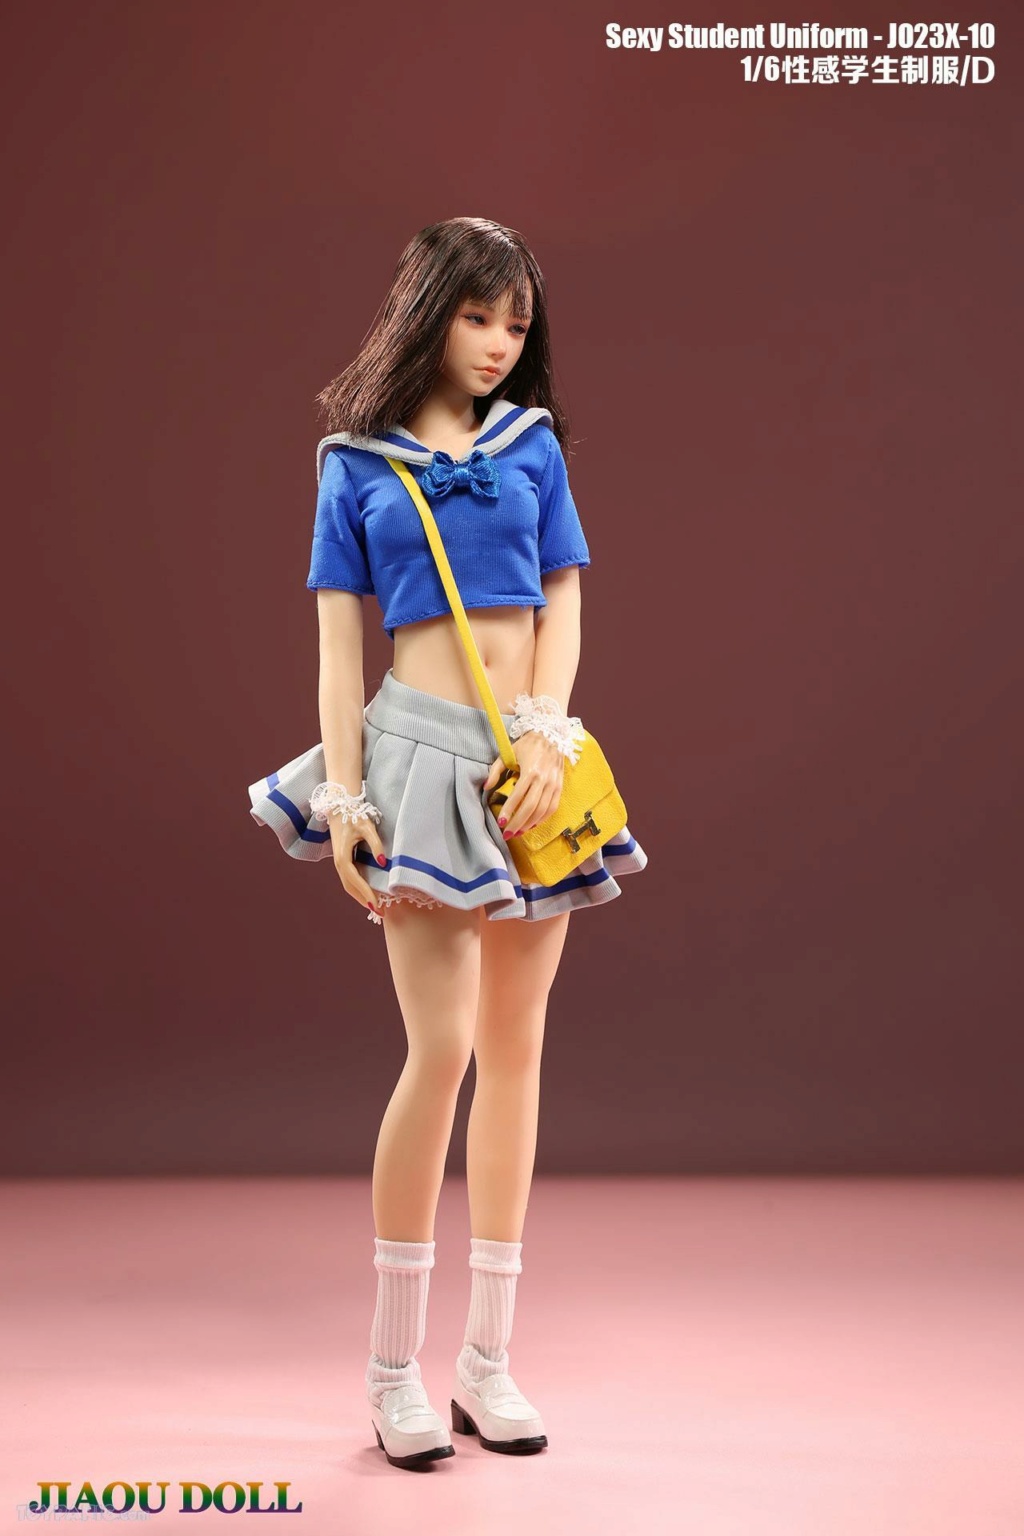 female - NEW PRODUCT: Jiaou Doll: 1/6 Sexy Student Uniform (7 color options) (JO23X-10A-G) (NSFW) 20920231